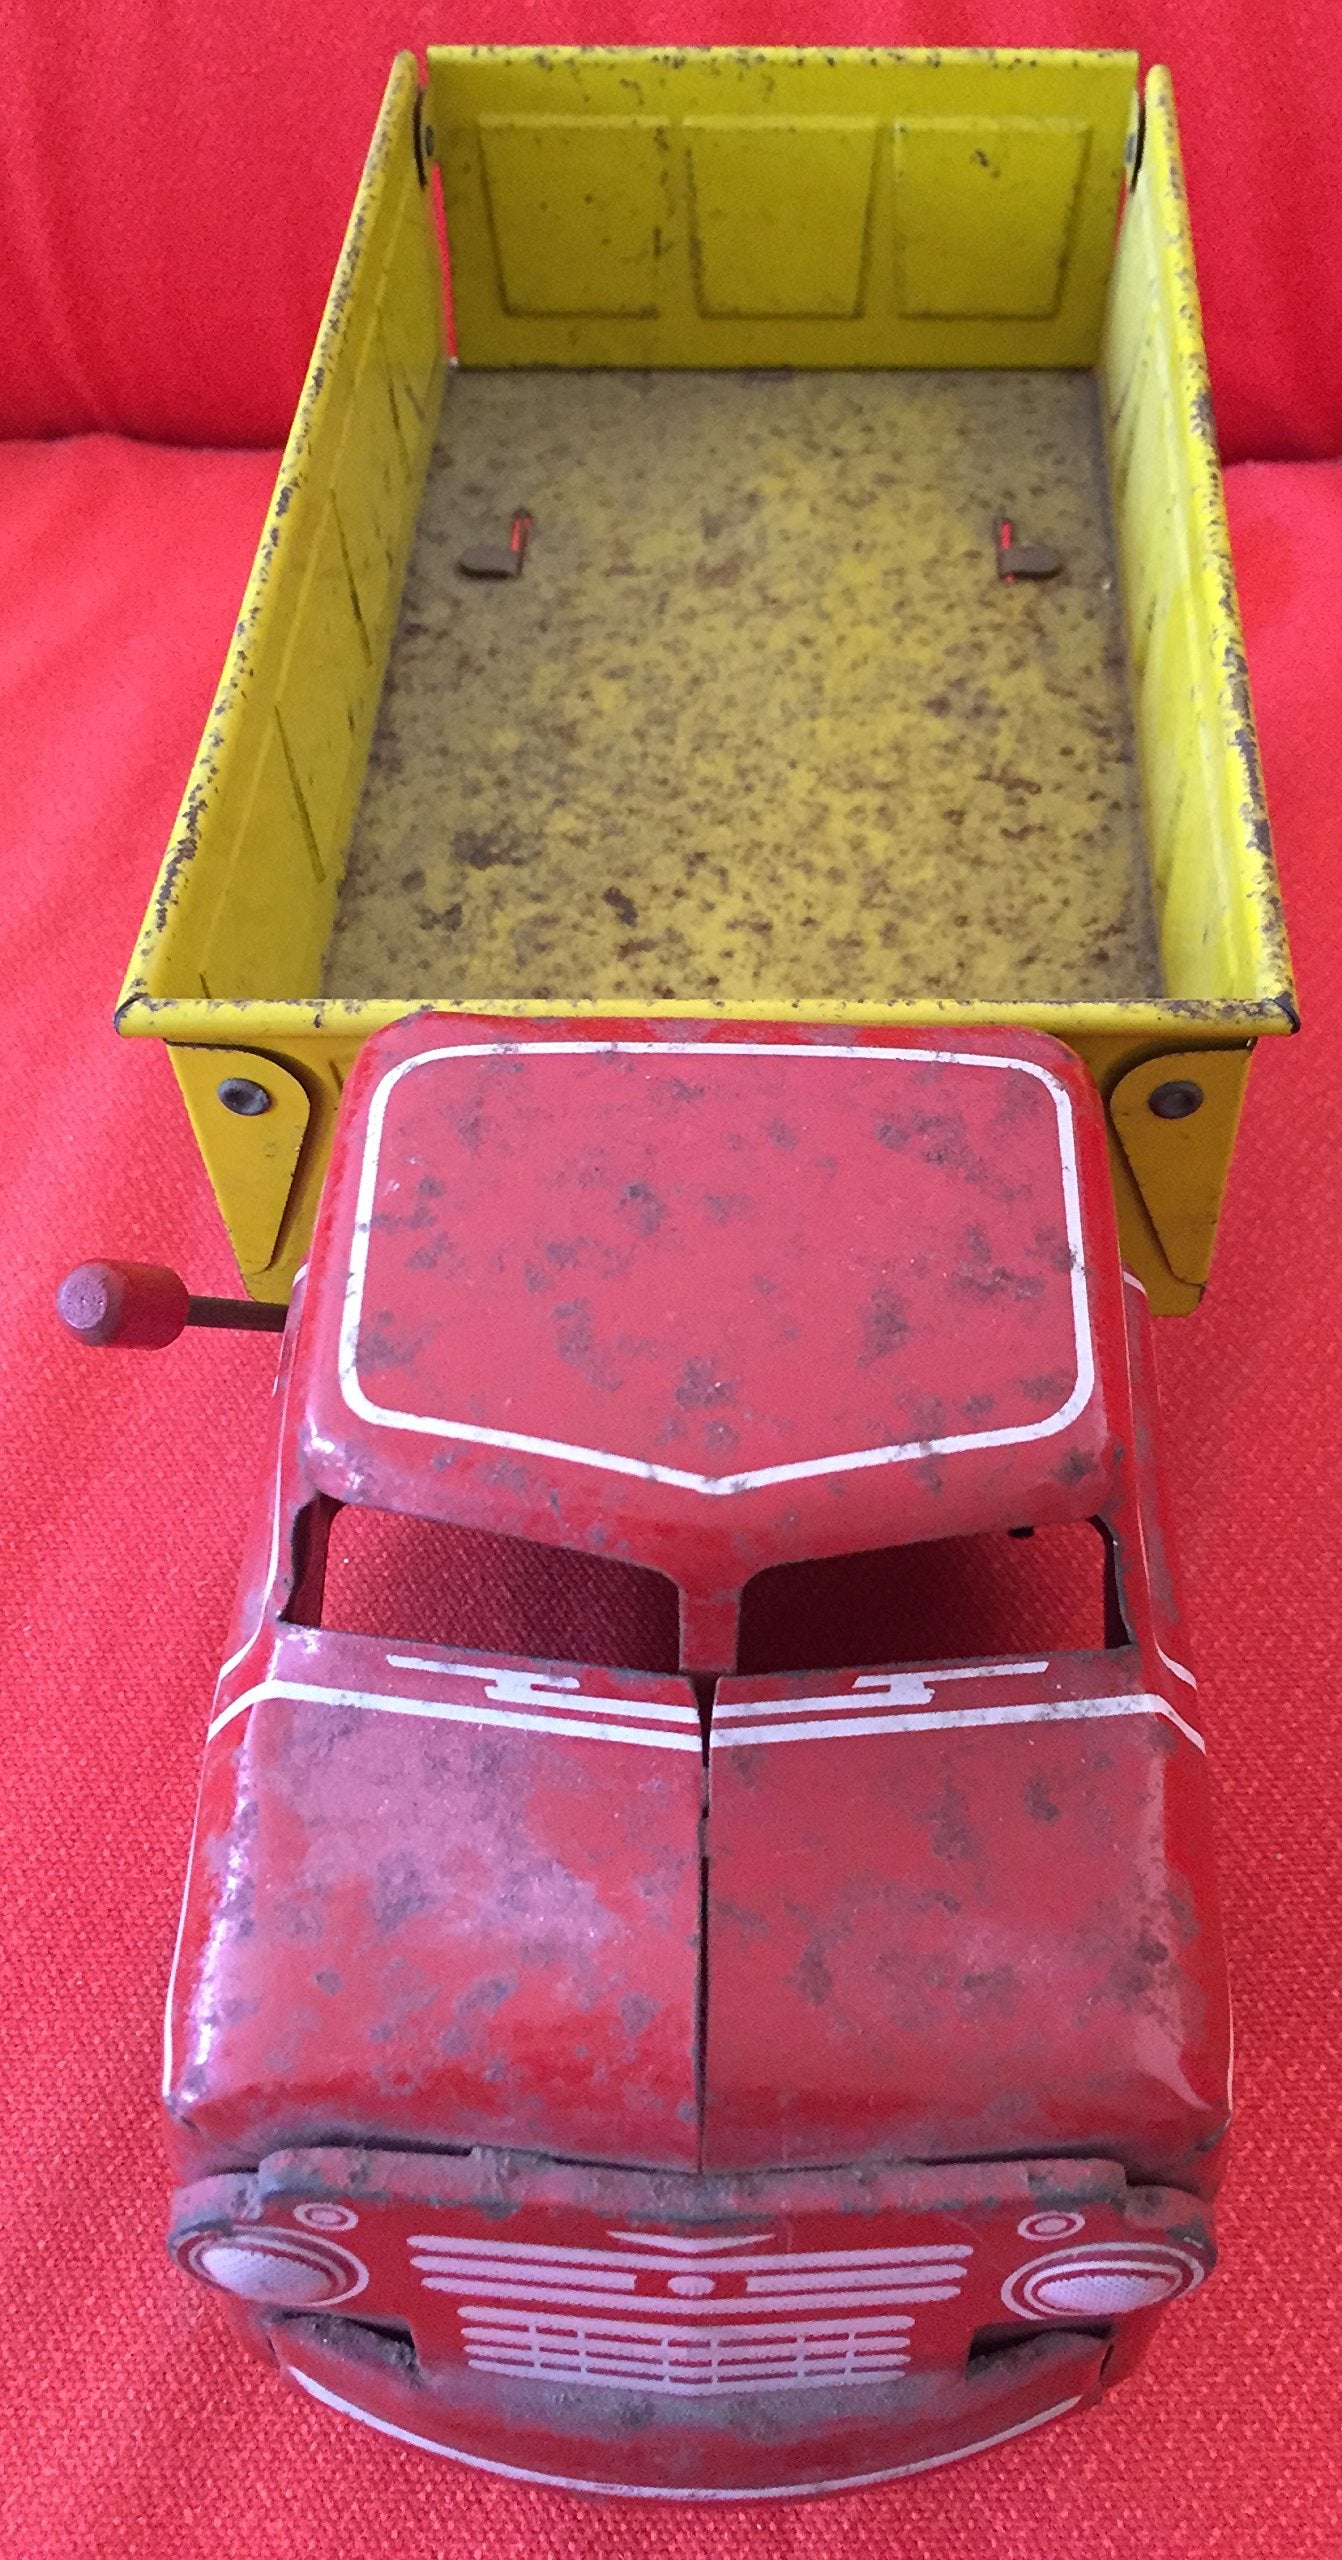 Vintage 1960'S - BTS British Road Services BRS Express Services Tipper Lorry Tin Toy